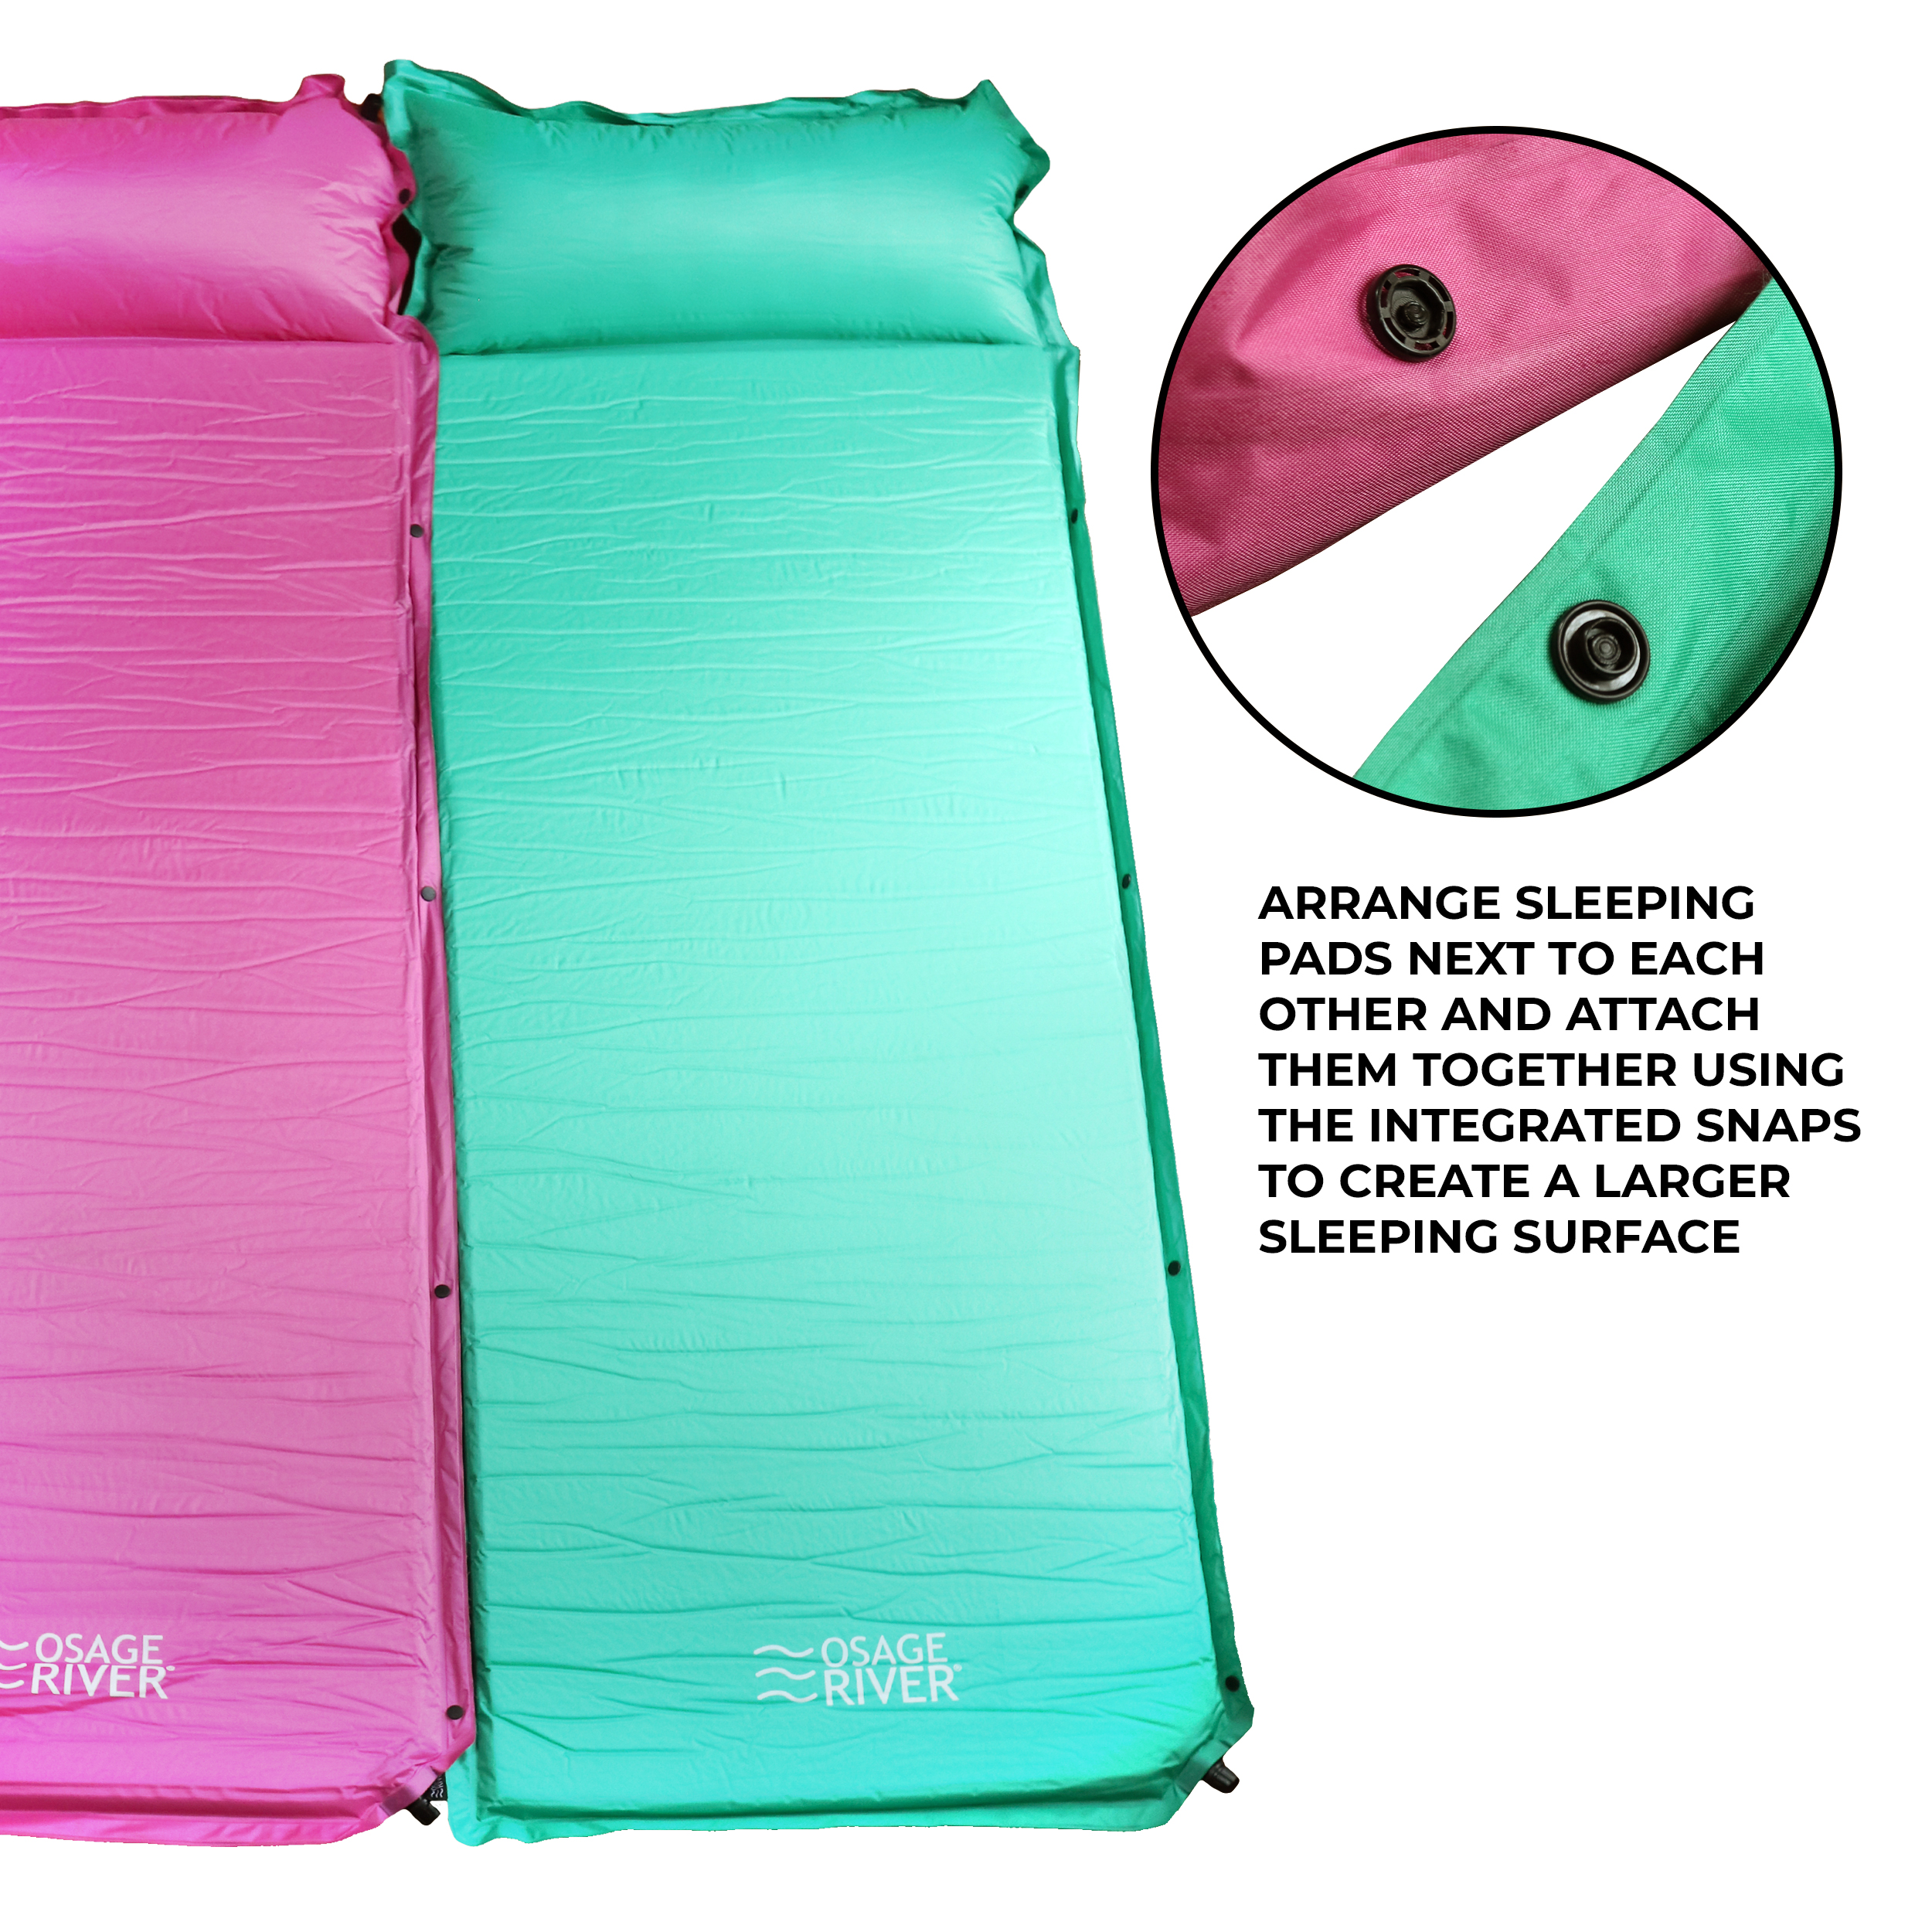 OSAGE RIVER Self Inflating Sleeping Pad with Built-in Pillow, Compact Memory Foam Sleep Mat, Camping Air Mattress for Tent, Travel, Backpacking, or Hiking, Grey - image 5 of 6